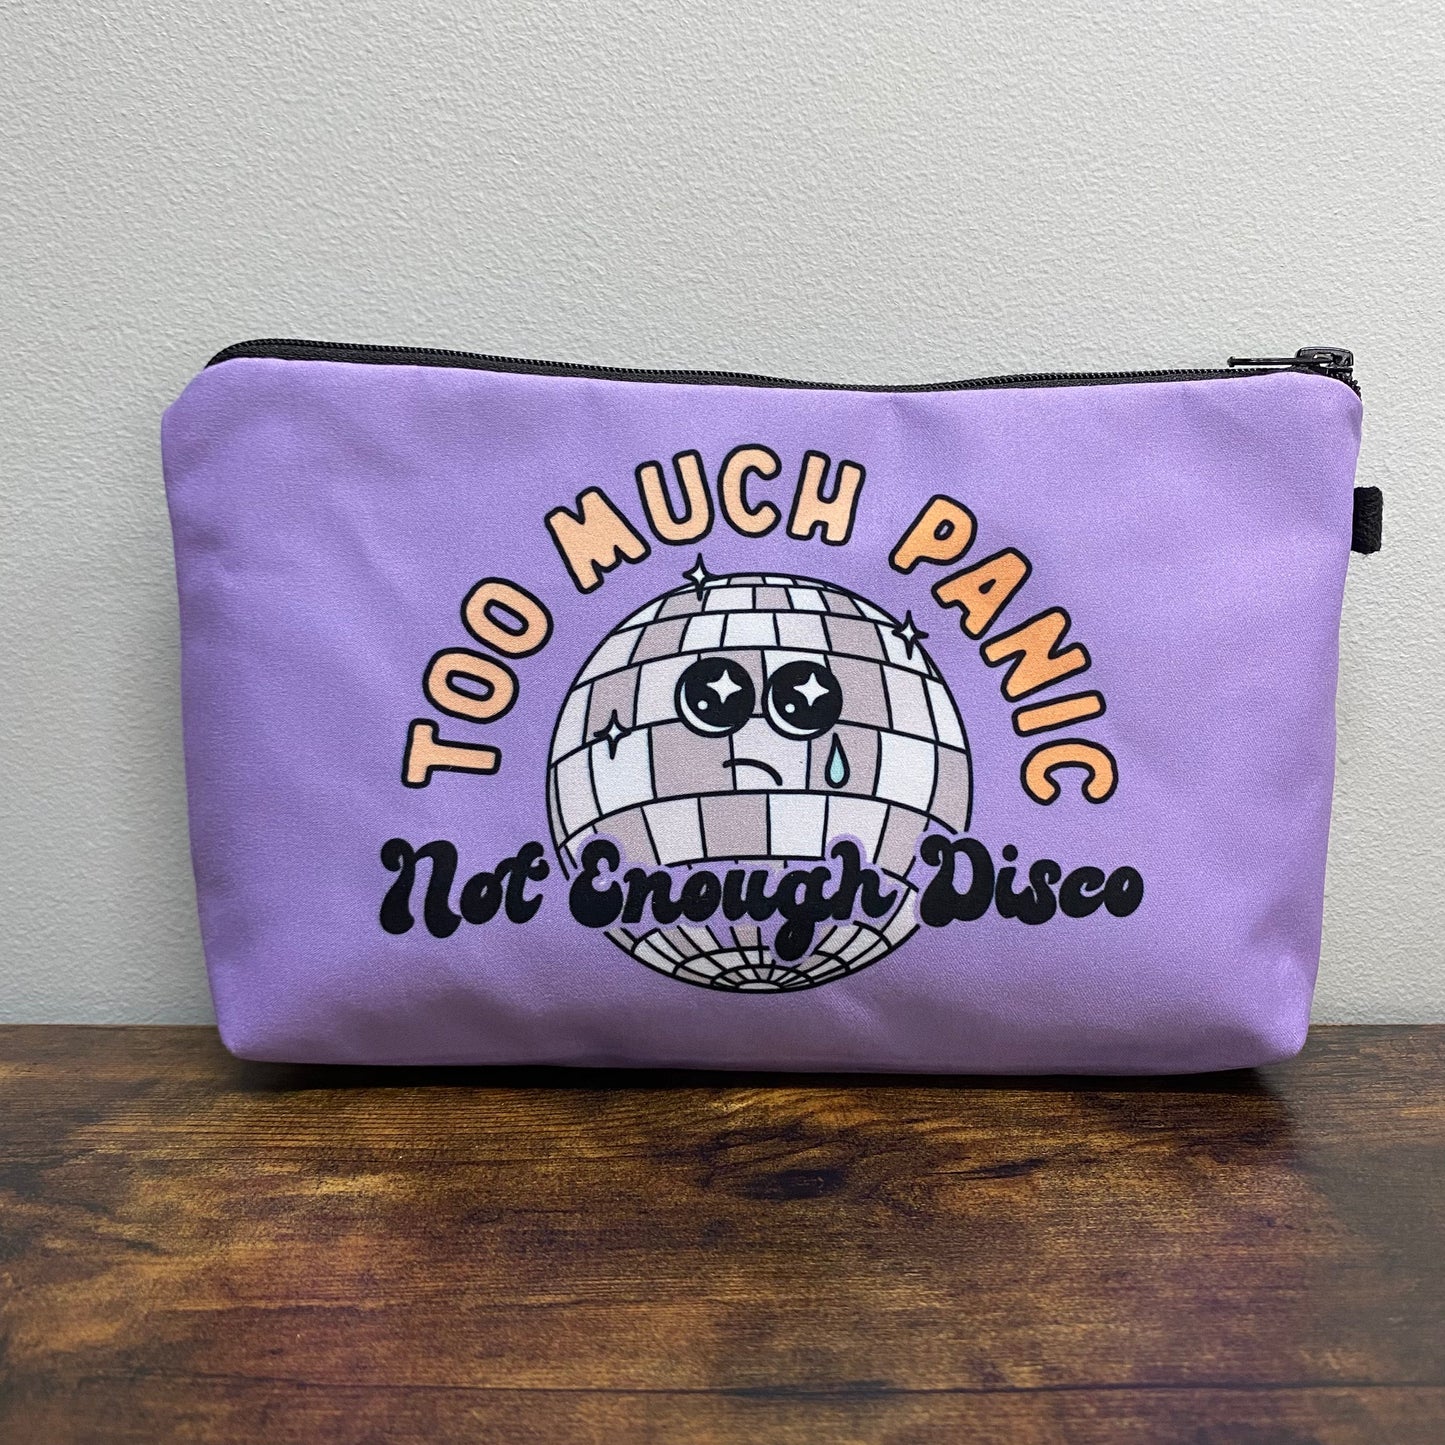 Panic Disco - Water-Resistant Multi-Use Pouch